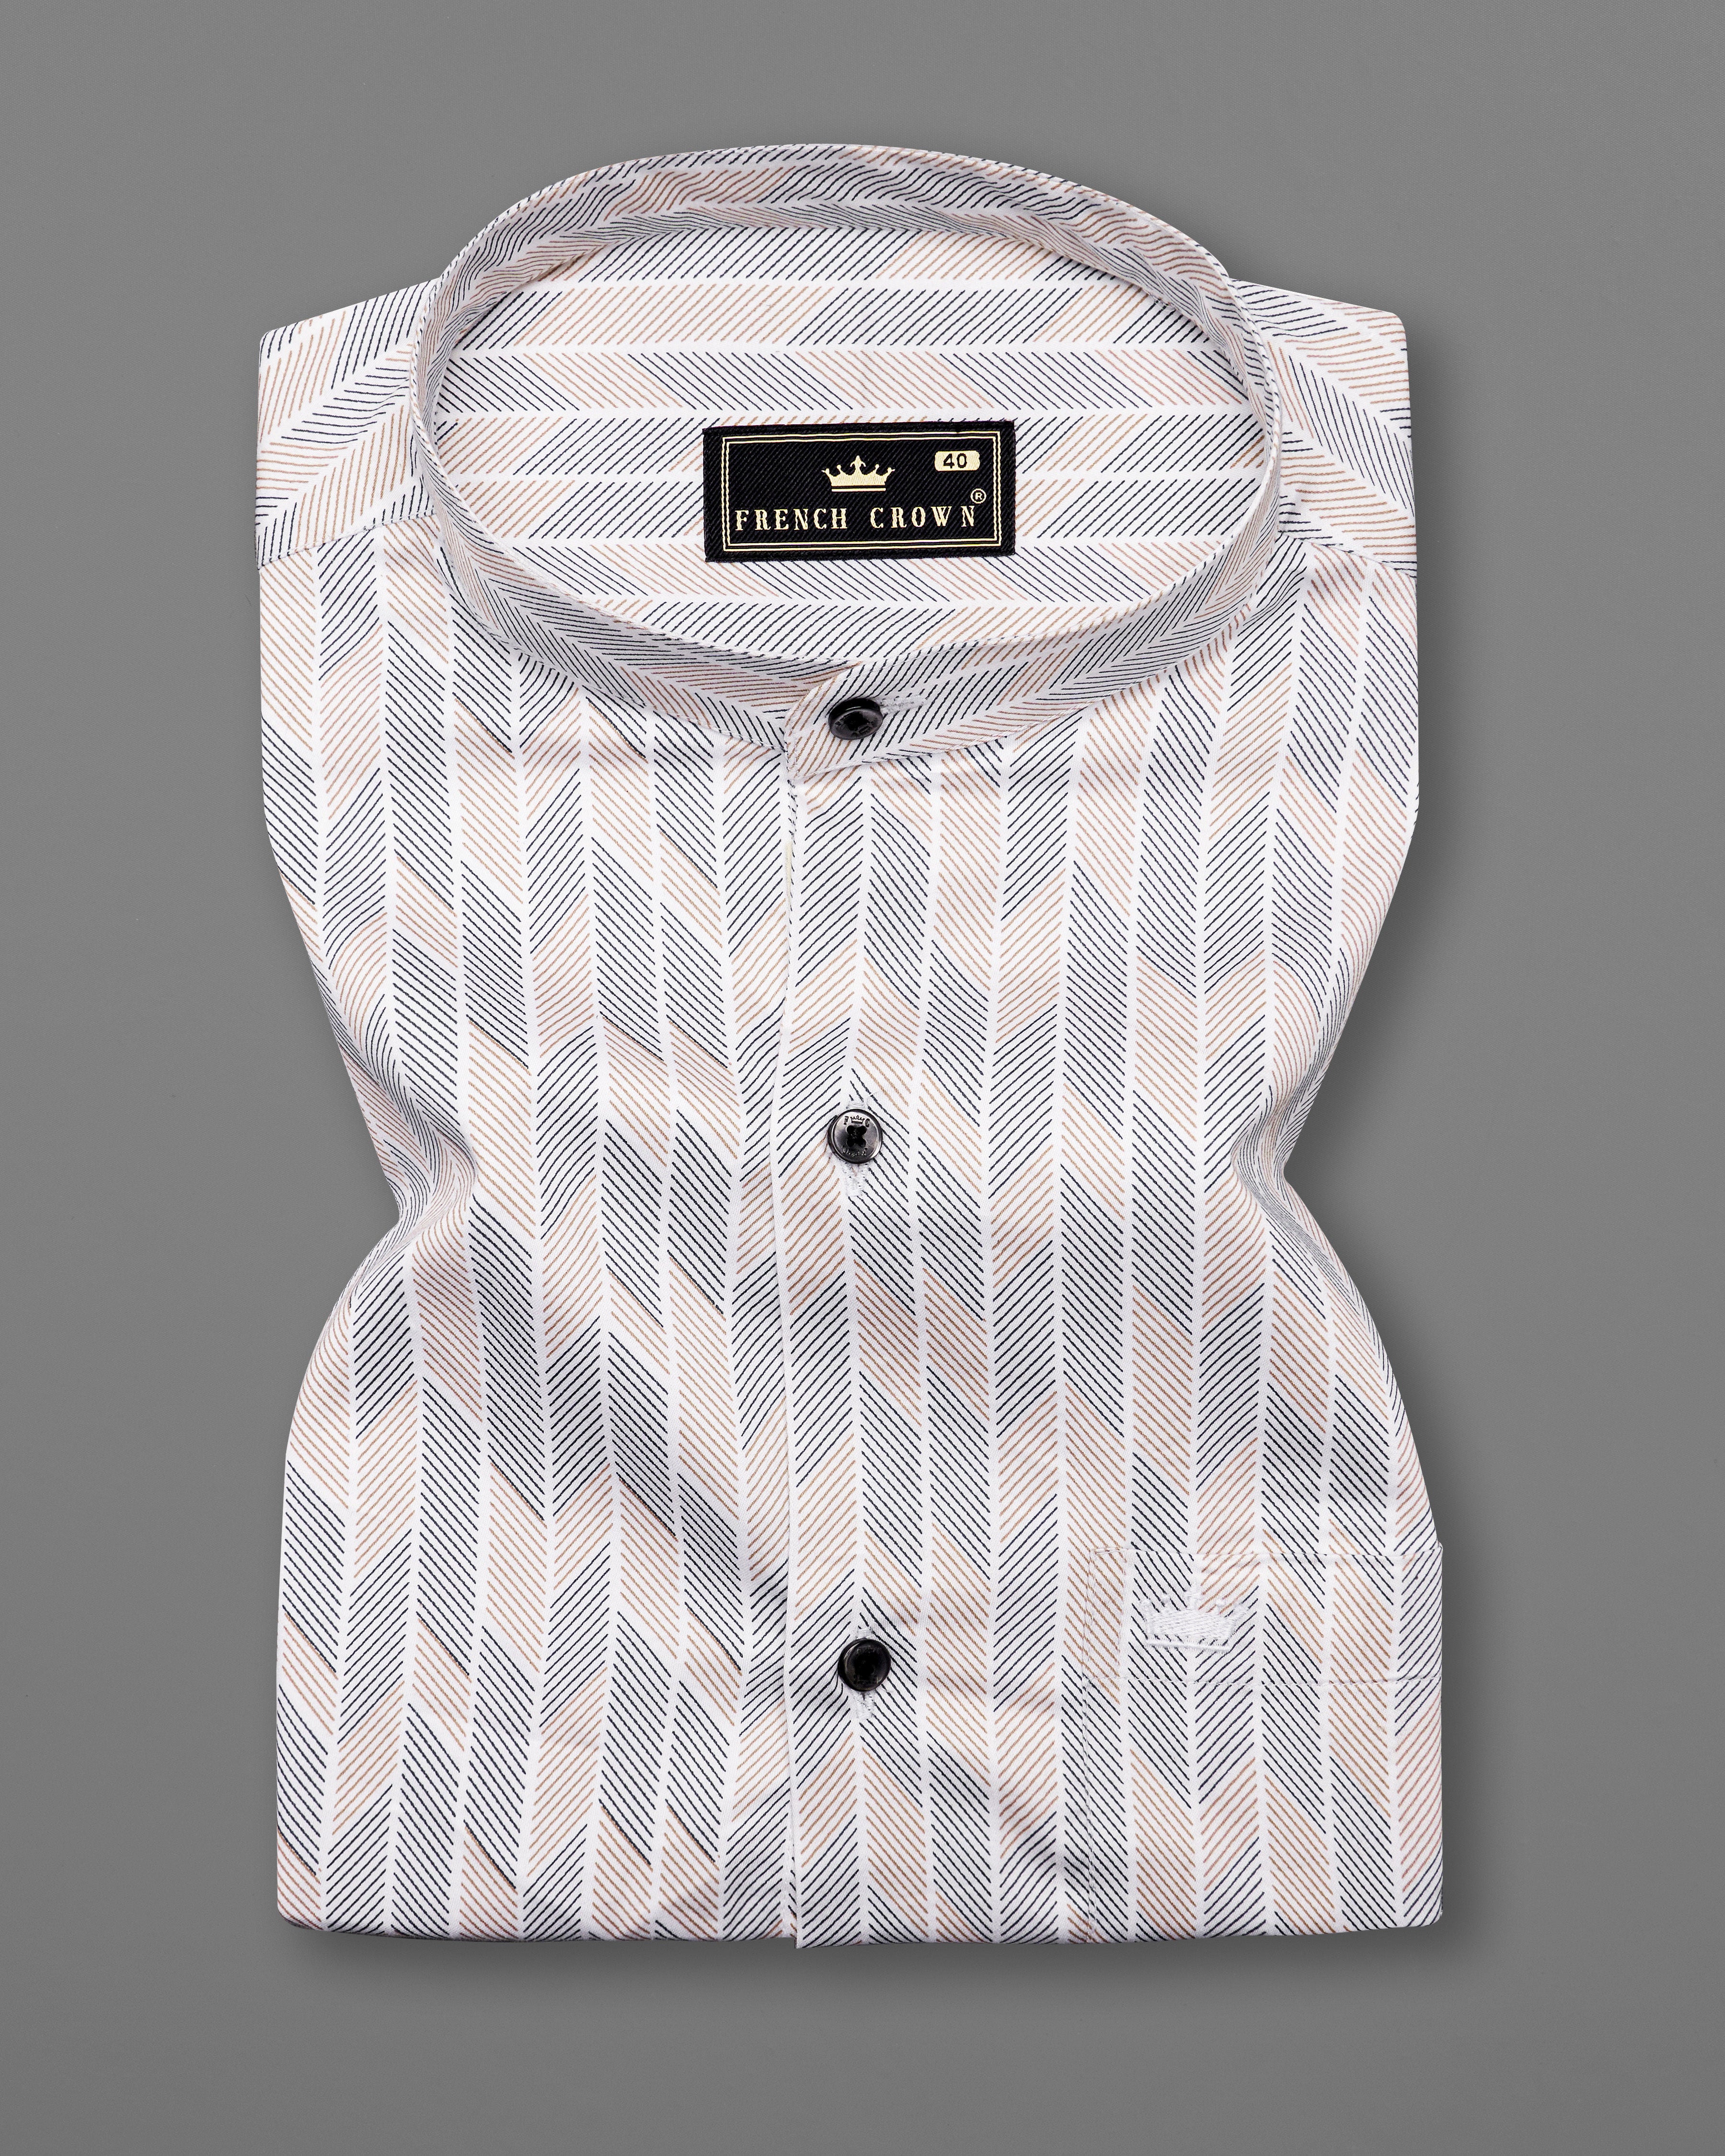 Bright White with Chestnut Brown and Flint Gray Super Soft Premium Cotton Half Sleeves Shirt 9639-M-BLK-SS-H-38, 9639-M-BLK-SS-H-39, 9639-M-BLK-SS-H-40, 9639-M-BLK-SS-H-42, 9639-M-BLK-SS-H-44, 9639-M-BLK-SS-H-46, 9639-M-BLK-SS-H-48, 9639-M-BLK-SS-H-50, 9639-M-BLK-SS-H-52